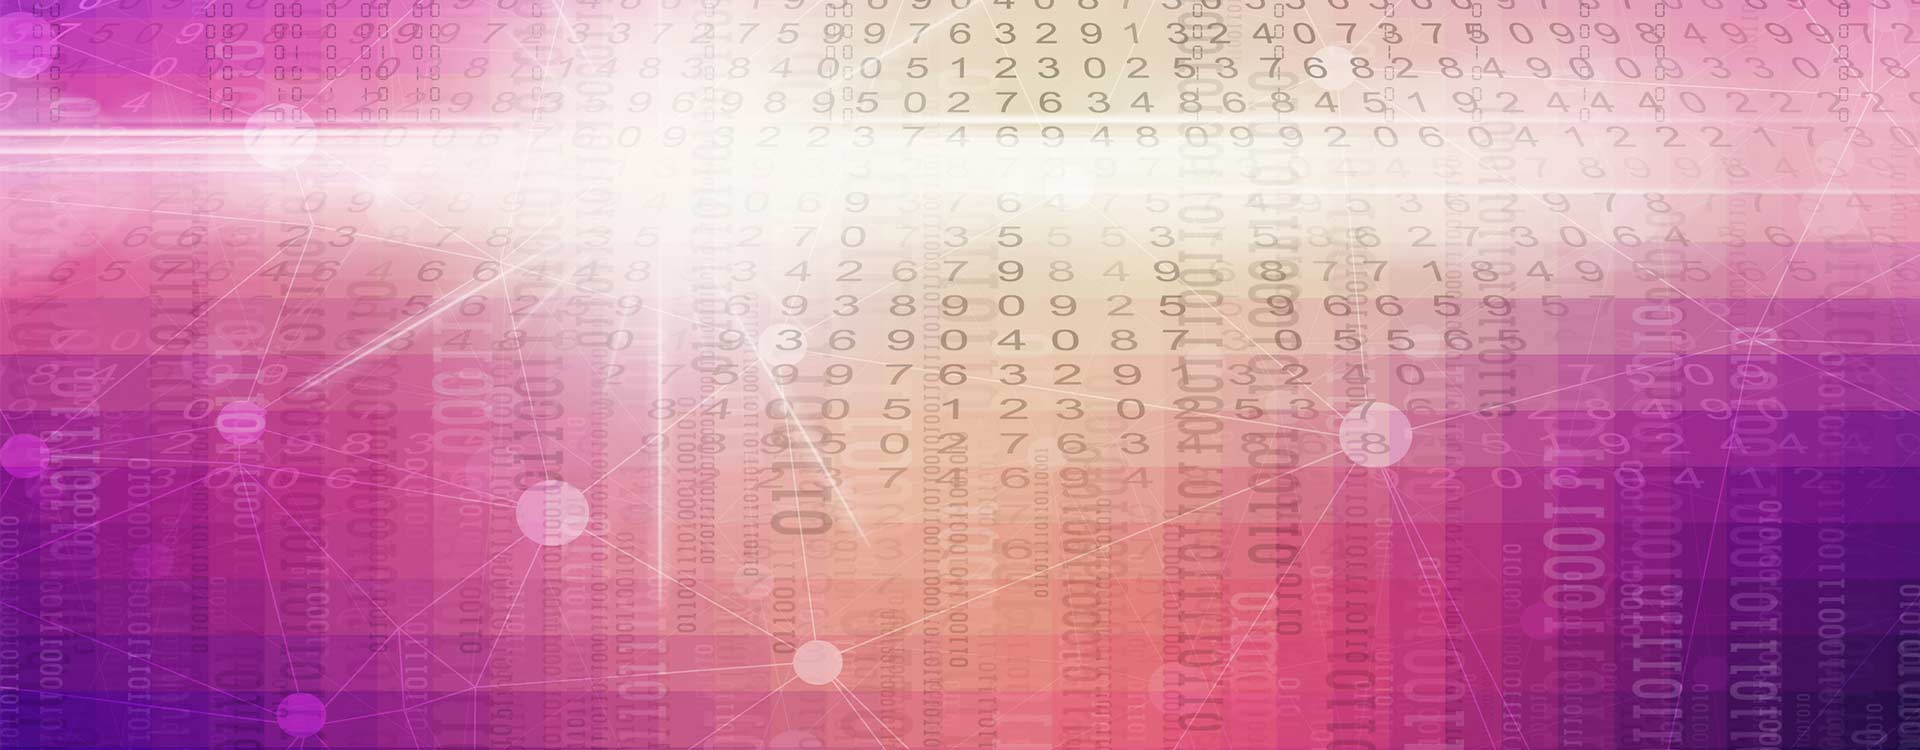 Abstract digital background featuring a blend of colorful gradients with overlaid white numbers and connected lines, suggesting a concept of network or data communication.